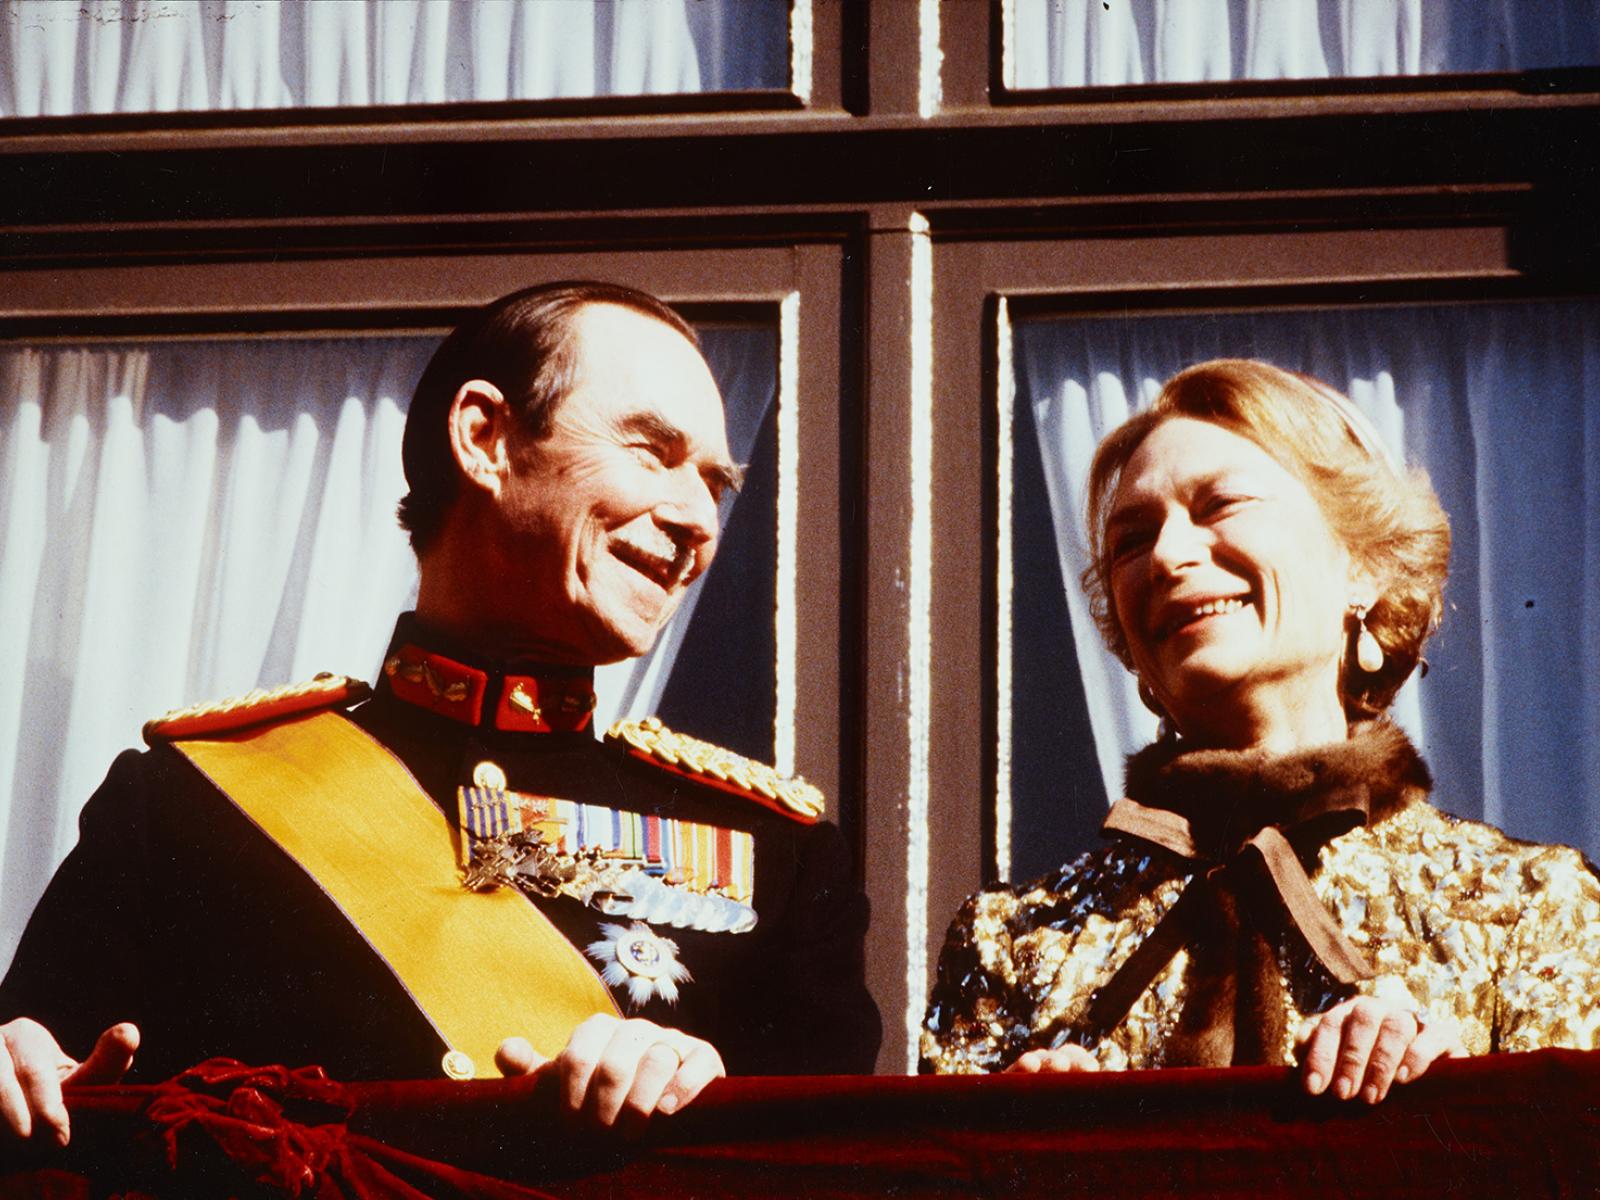 Grand Duke Jean and Grand Duchess Joséphine-Charlotte on the balcony of the Grand Ducal Palace